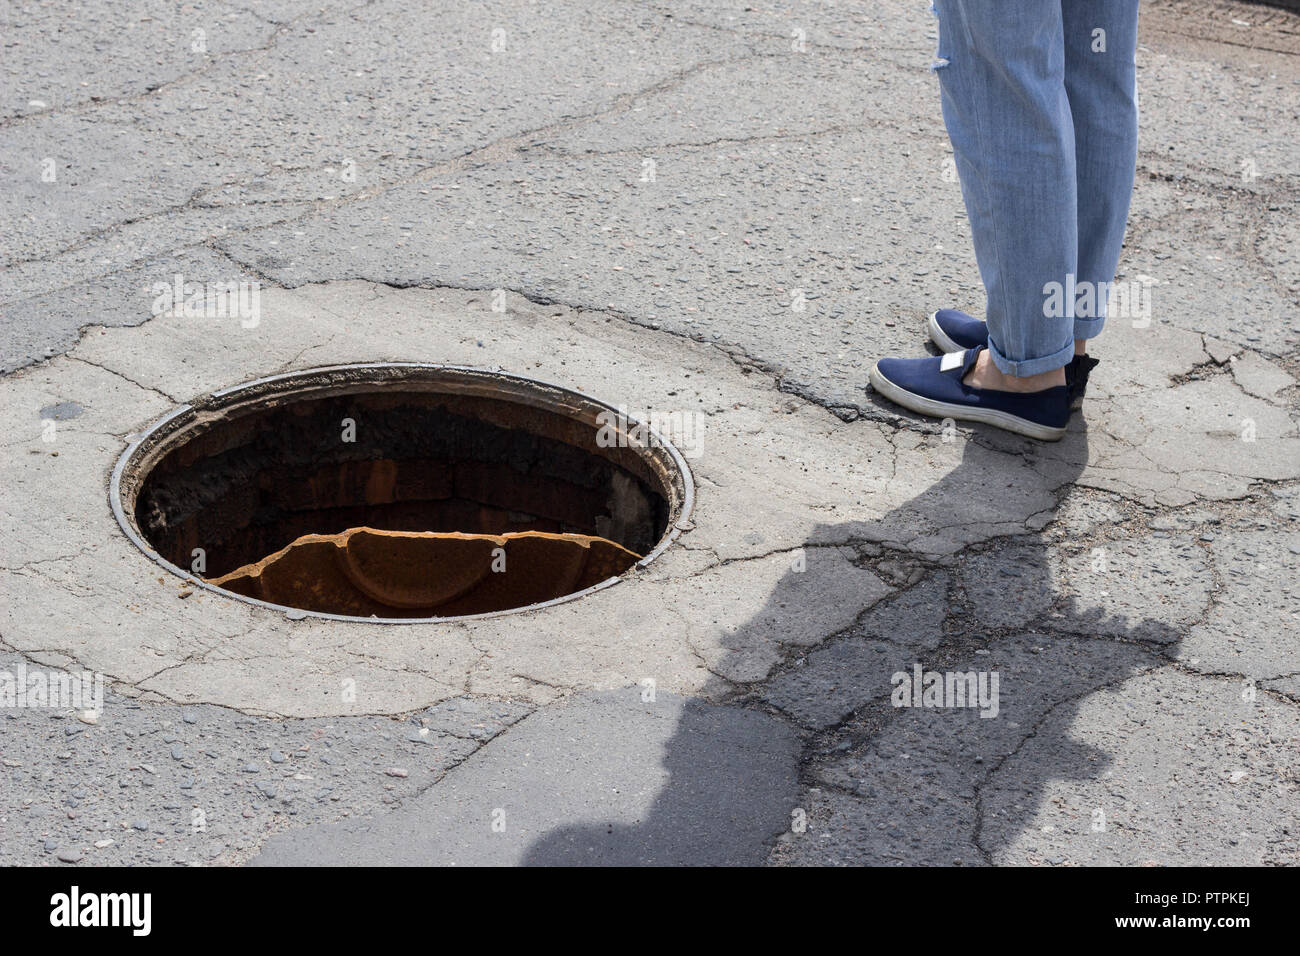 Outdoor sewer and feet in jeans, close-up Stock Photo